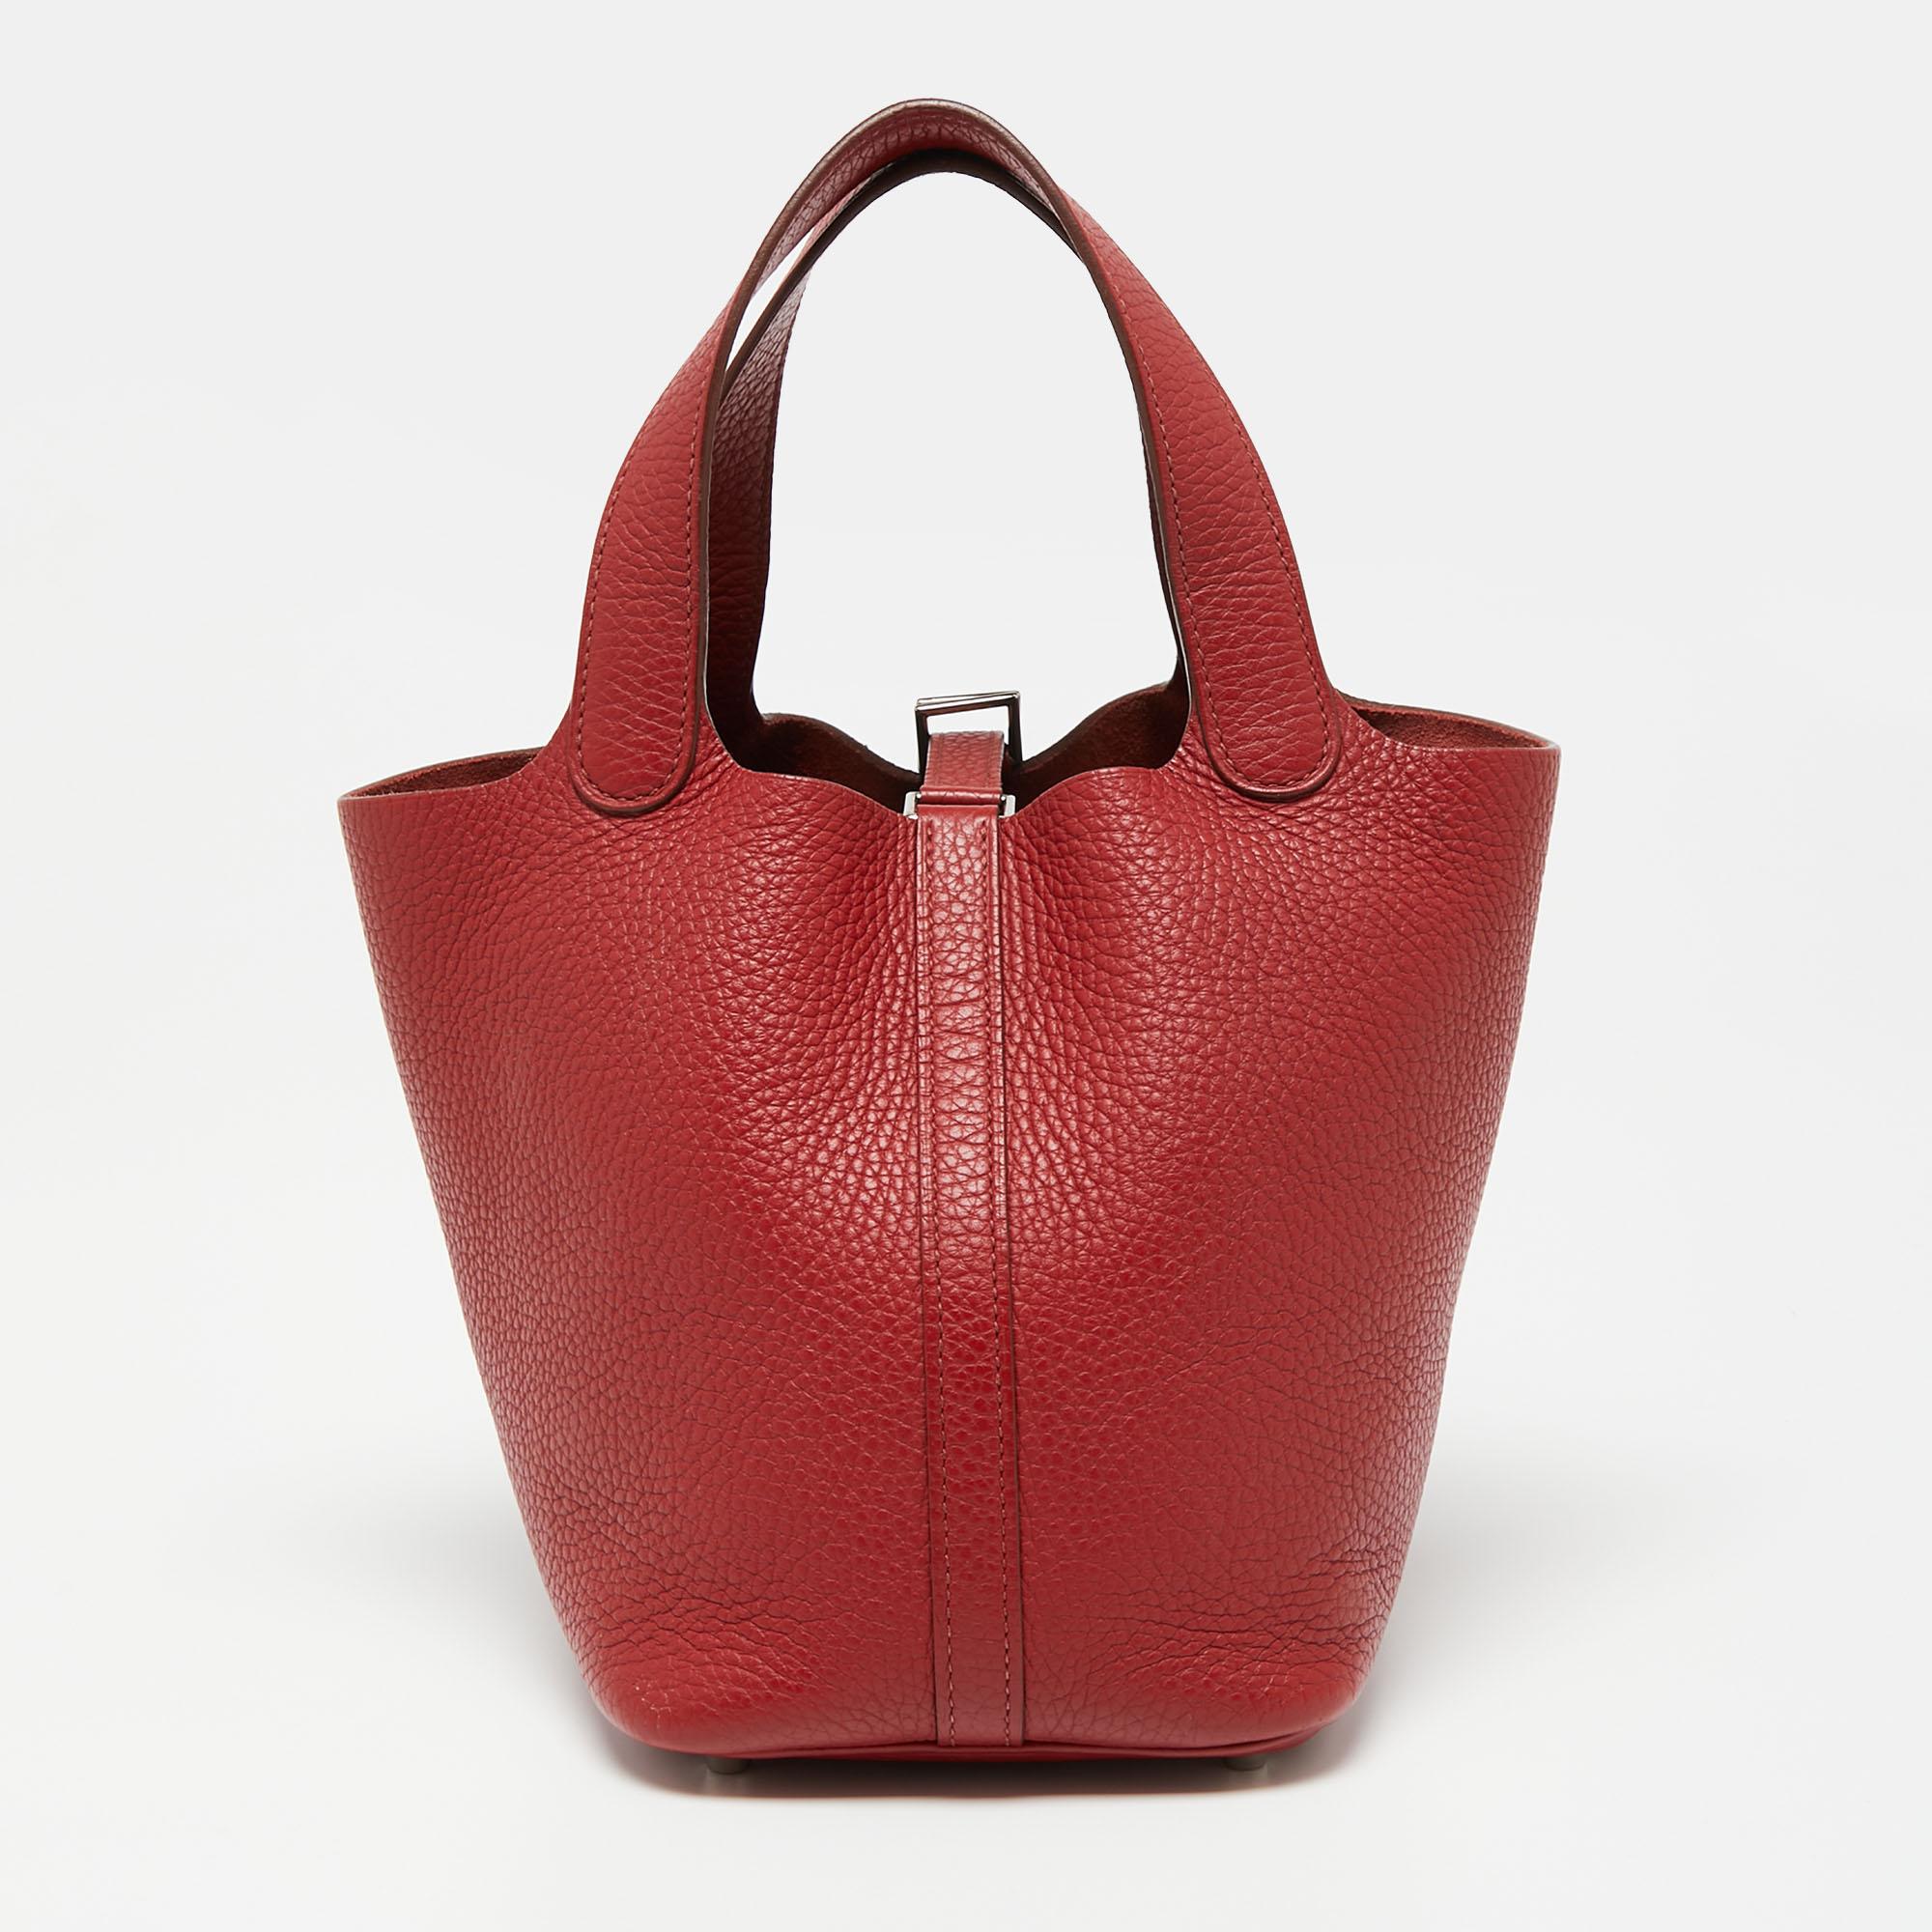 Wonderfully crafted from Rouge Garance Togo leather, this Hermes Picotin Lock 18 is a creation for those who love a blend of luxury and style. It comes in a grand color and it sits in a bucket-like shape with two handles and a leather interior.